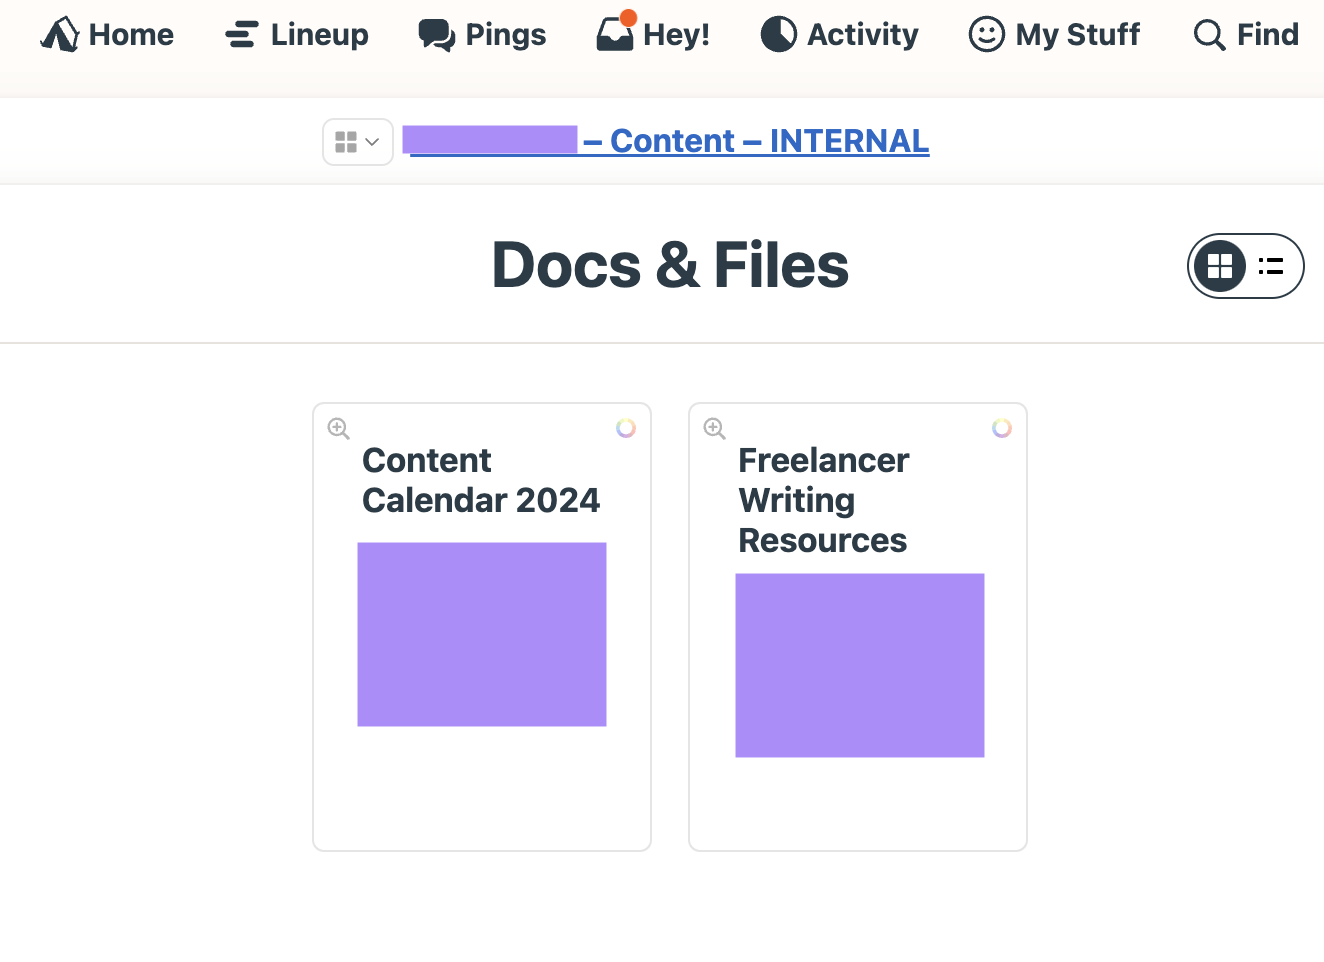 The Docs & Files section in Basecamp